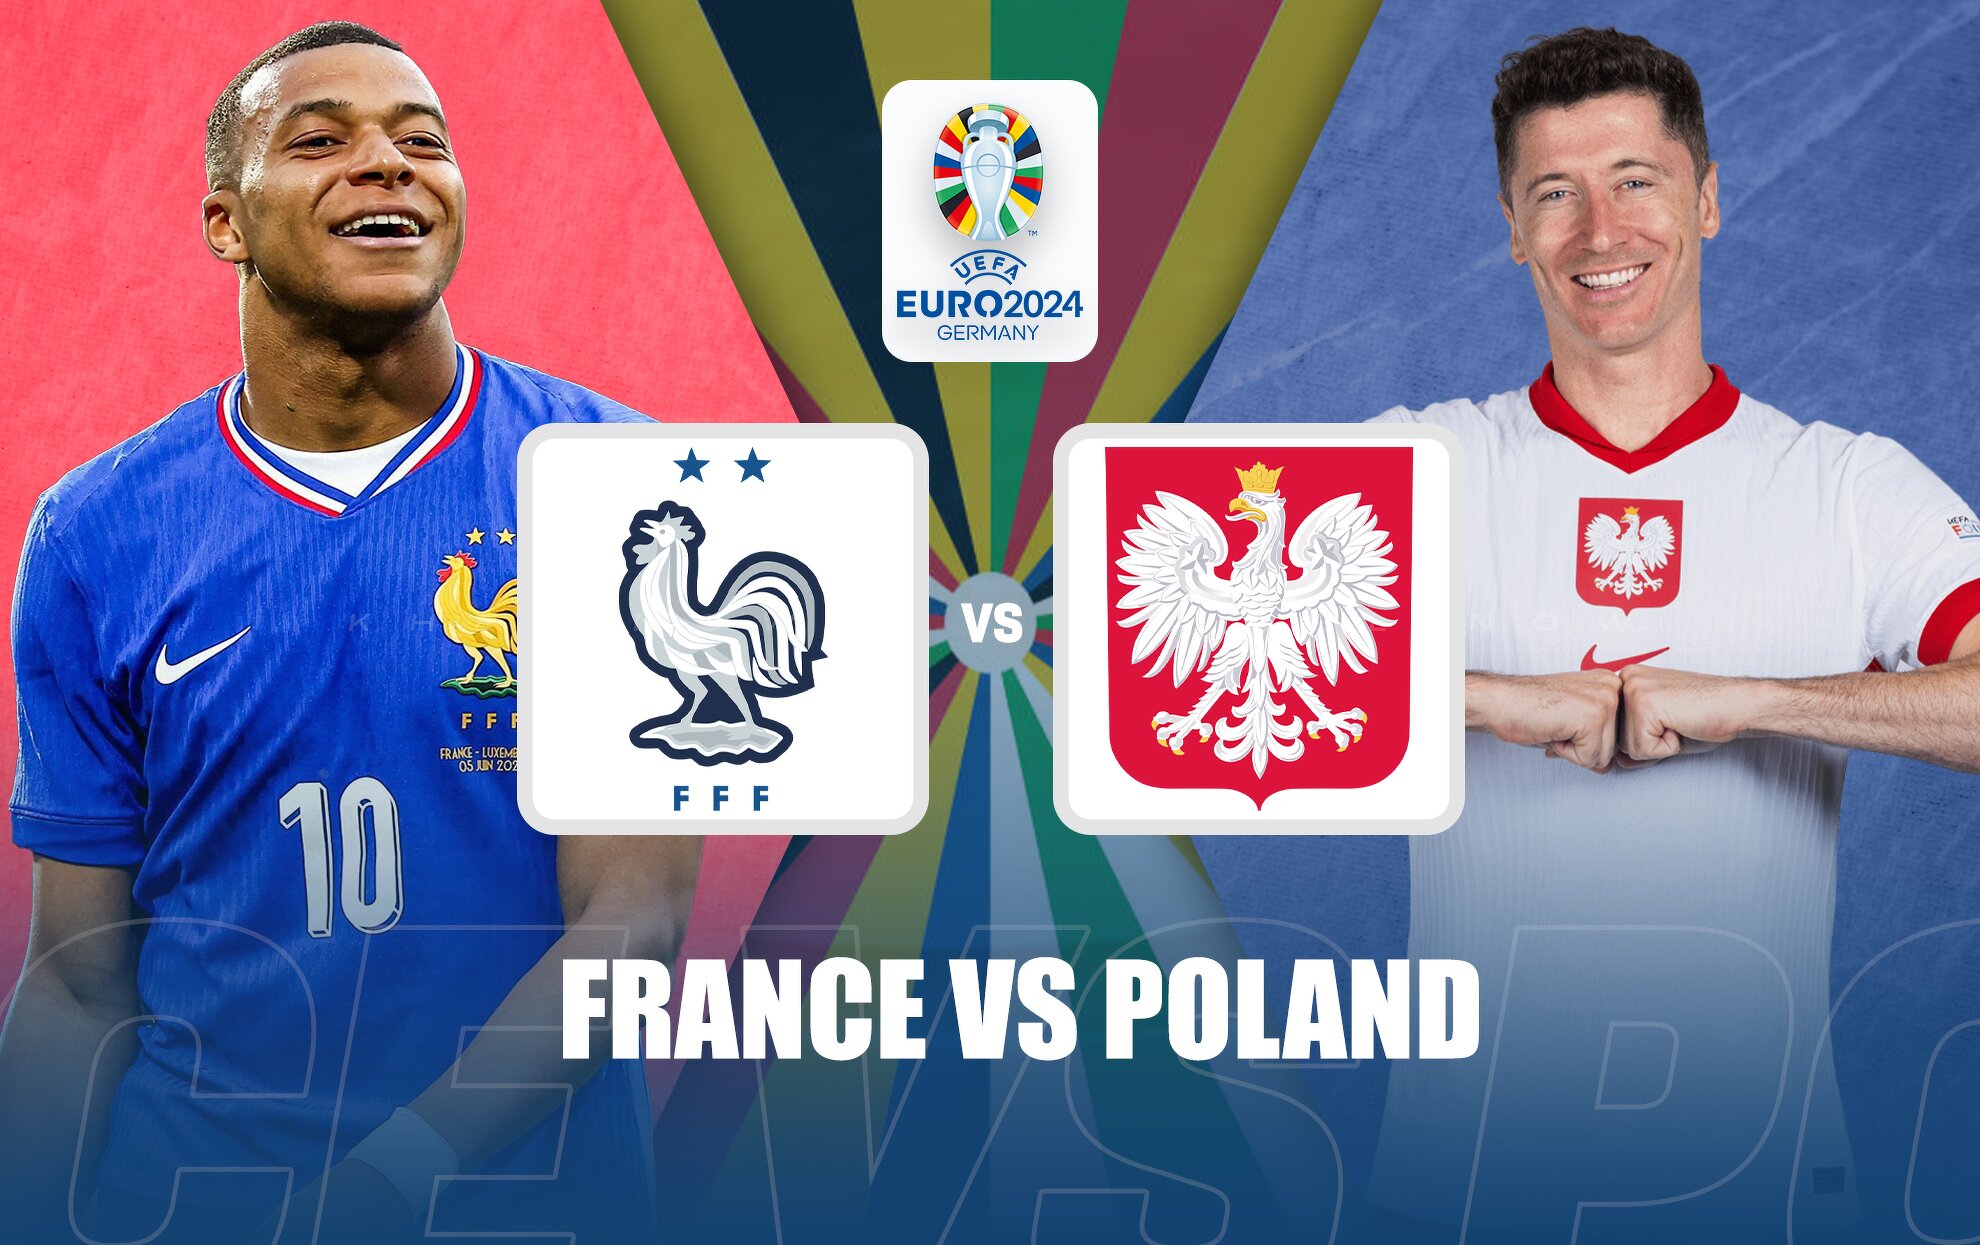 France vs Poland Live streaming, TV channel, kickoff time & where to